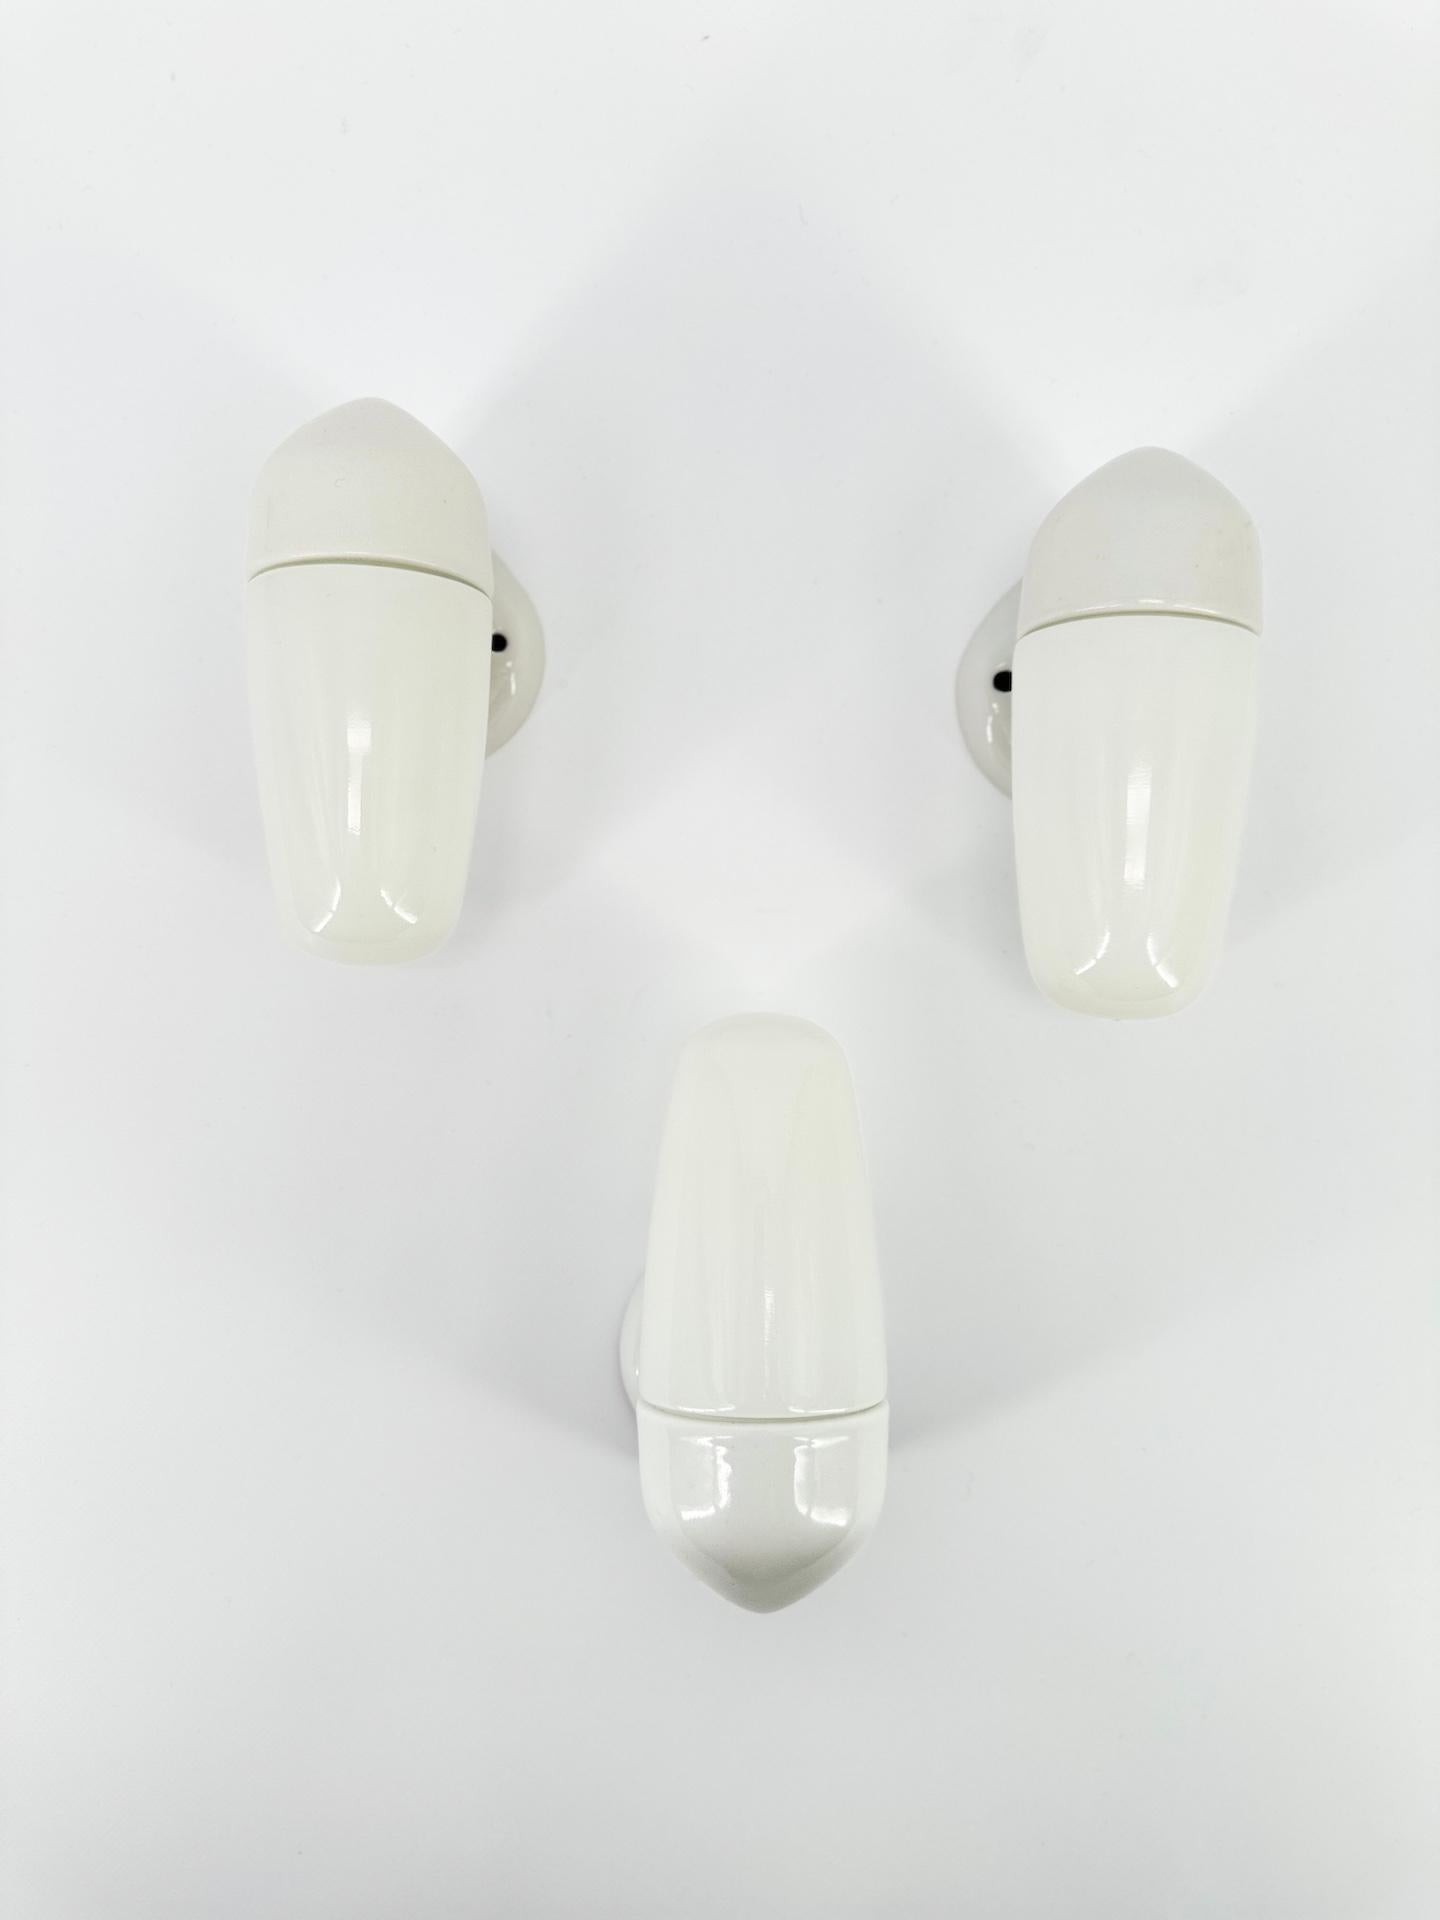 Ceramic Wall Lamp By Wilhelm Wagenfeld For Lindner 1950's Three in Stock For Sale 3